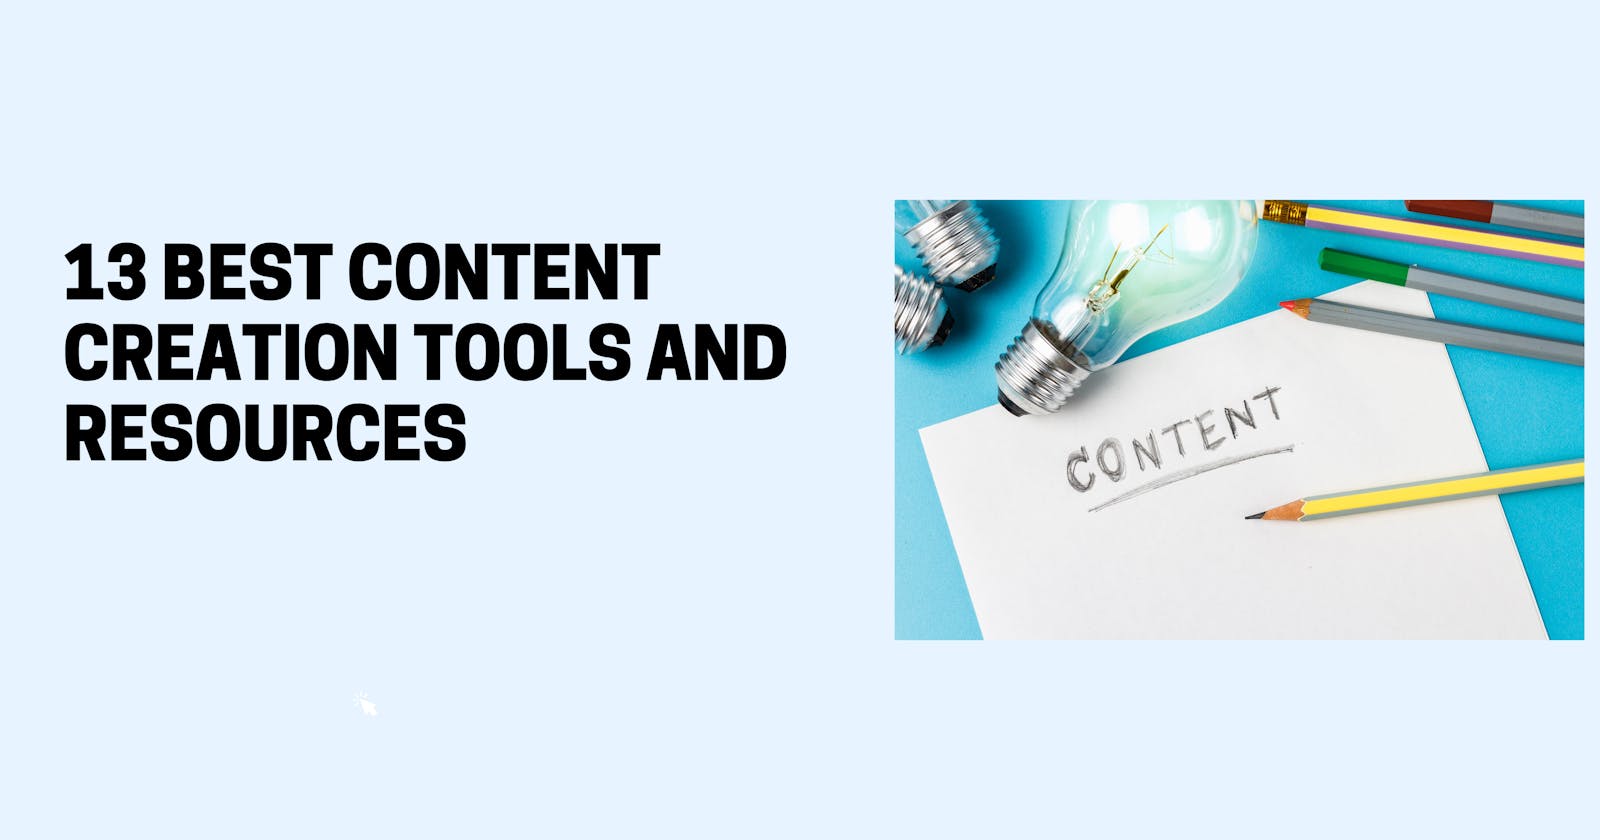 13 Best Content Creation Tools And Resources